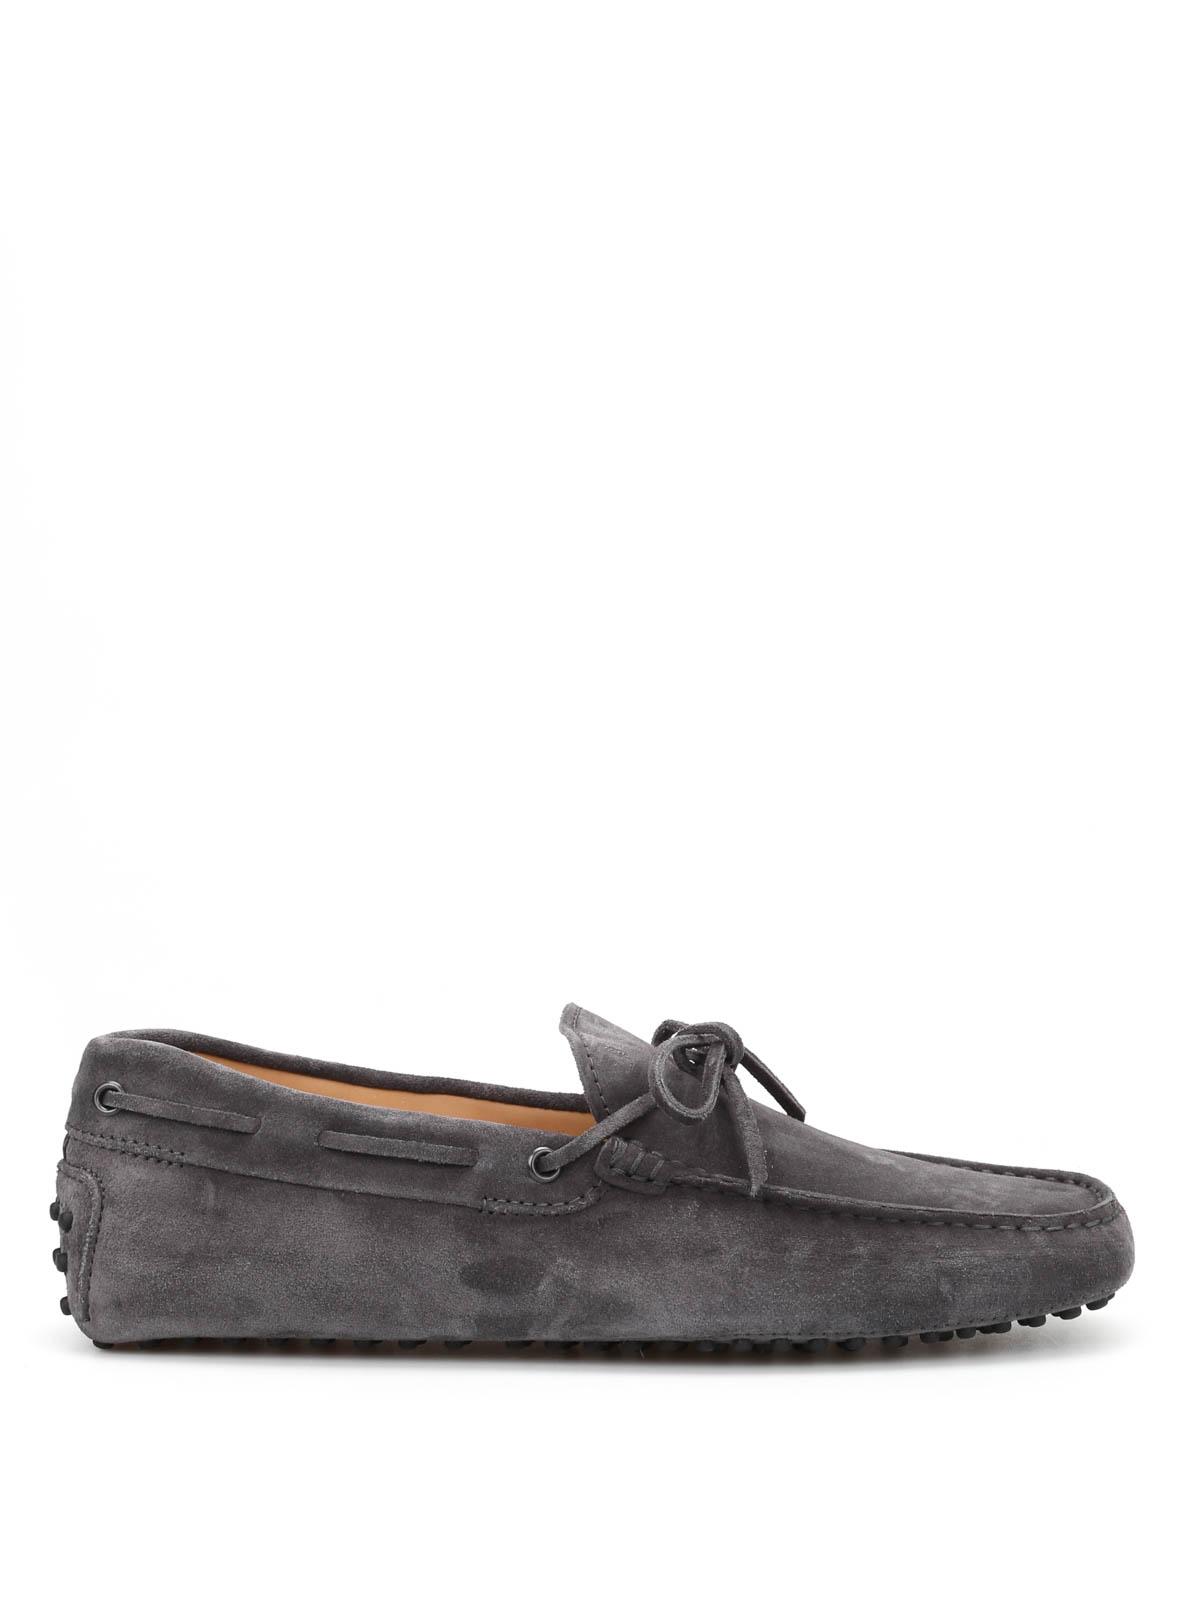 Tod's Suede New Laccetto Loafers in Dark Grey (Gray) - Lyst